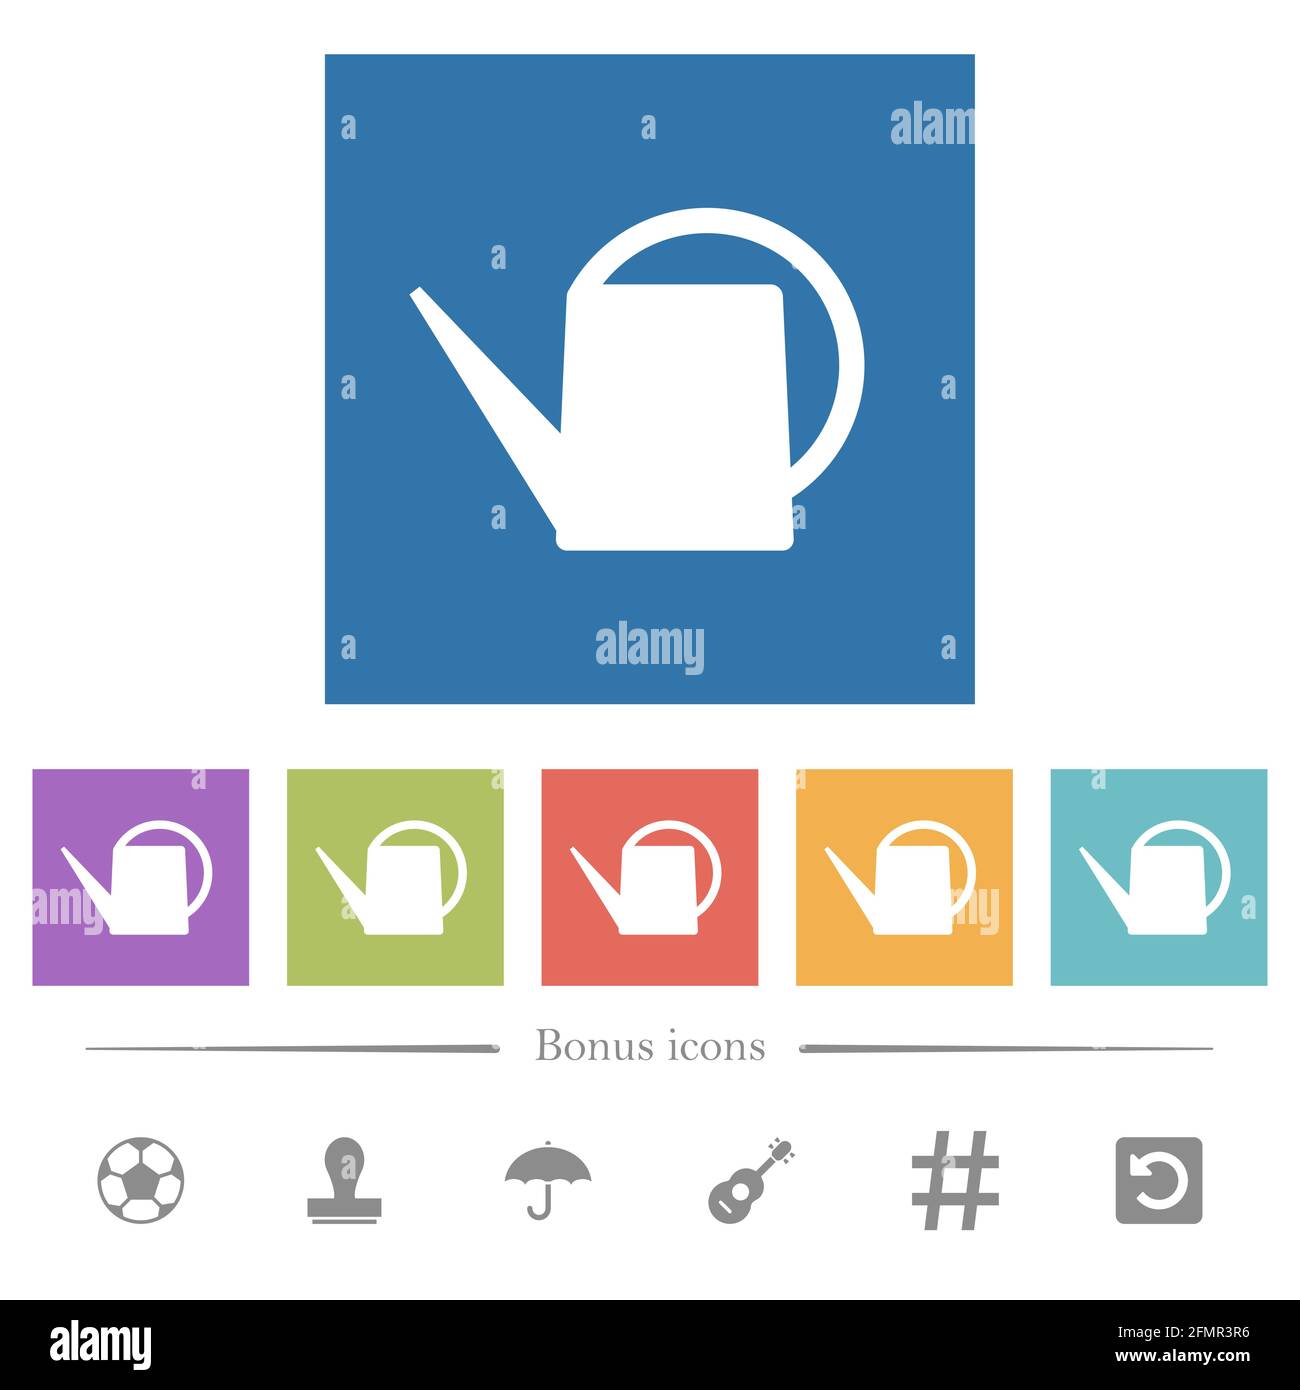 Watering can flat white icons in square backgrounds. 6 bonus icons included. Stock Vector